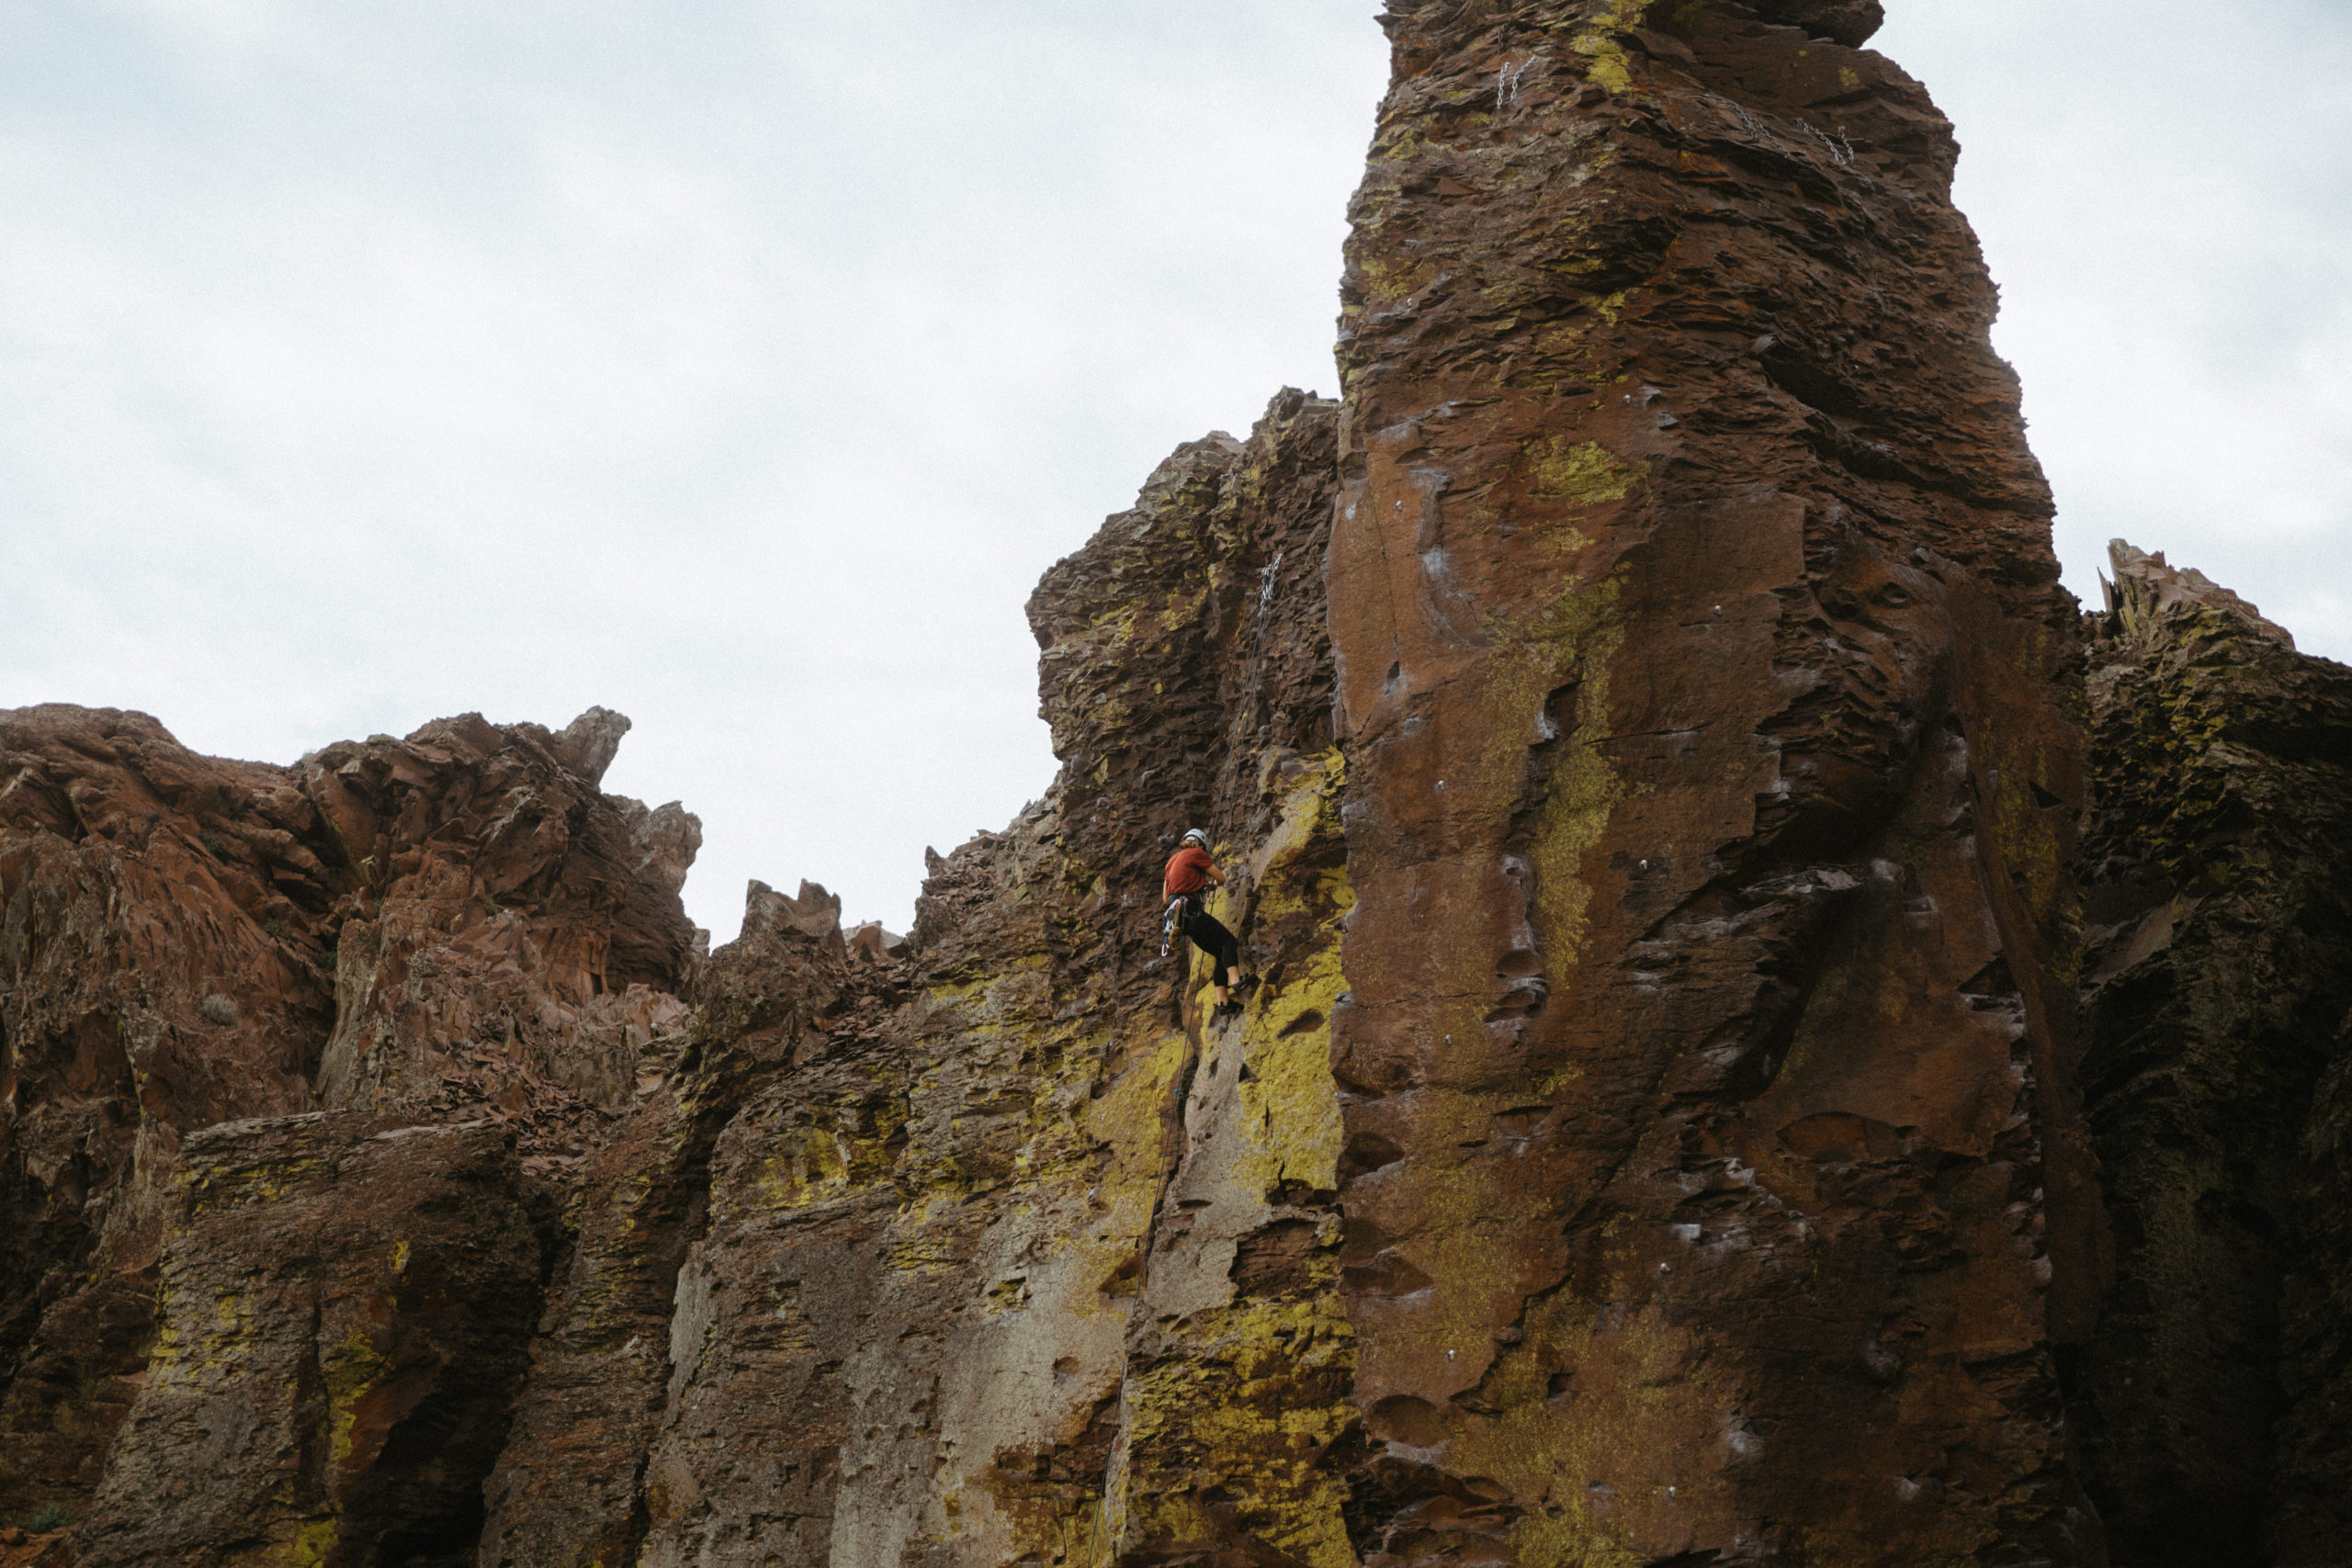 Climbers at The Feathers in Frenchman Coulee, Vantage, WA